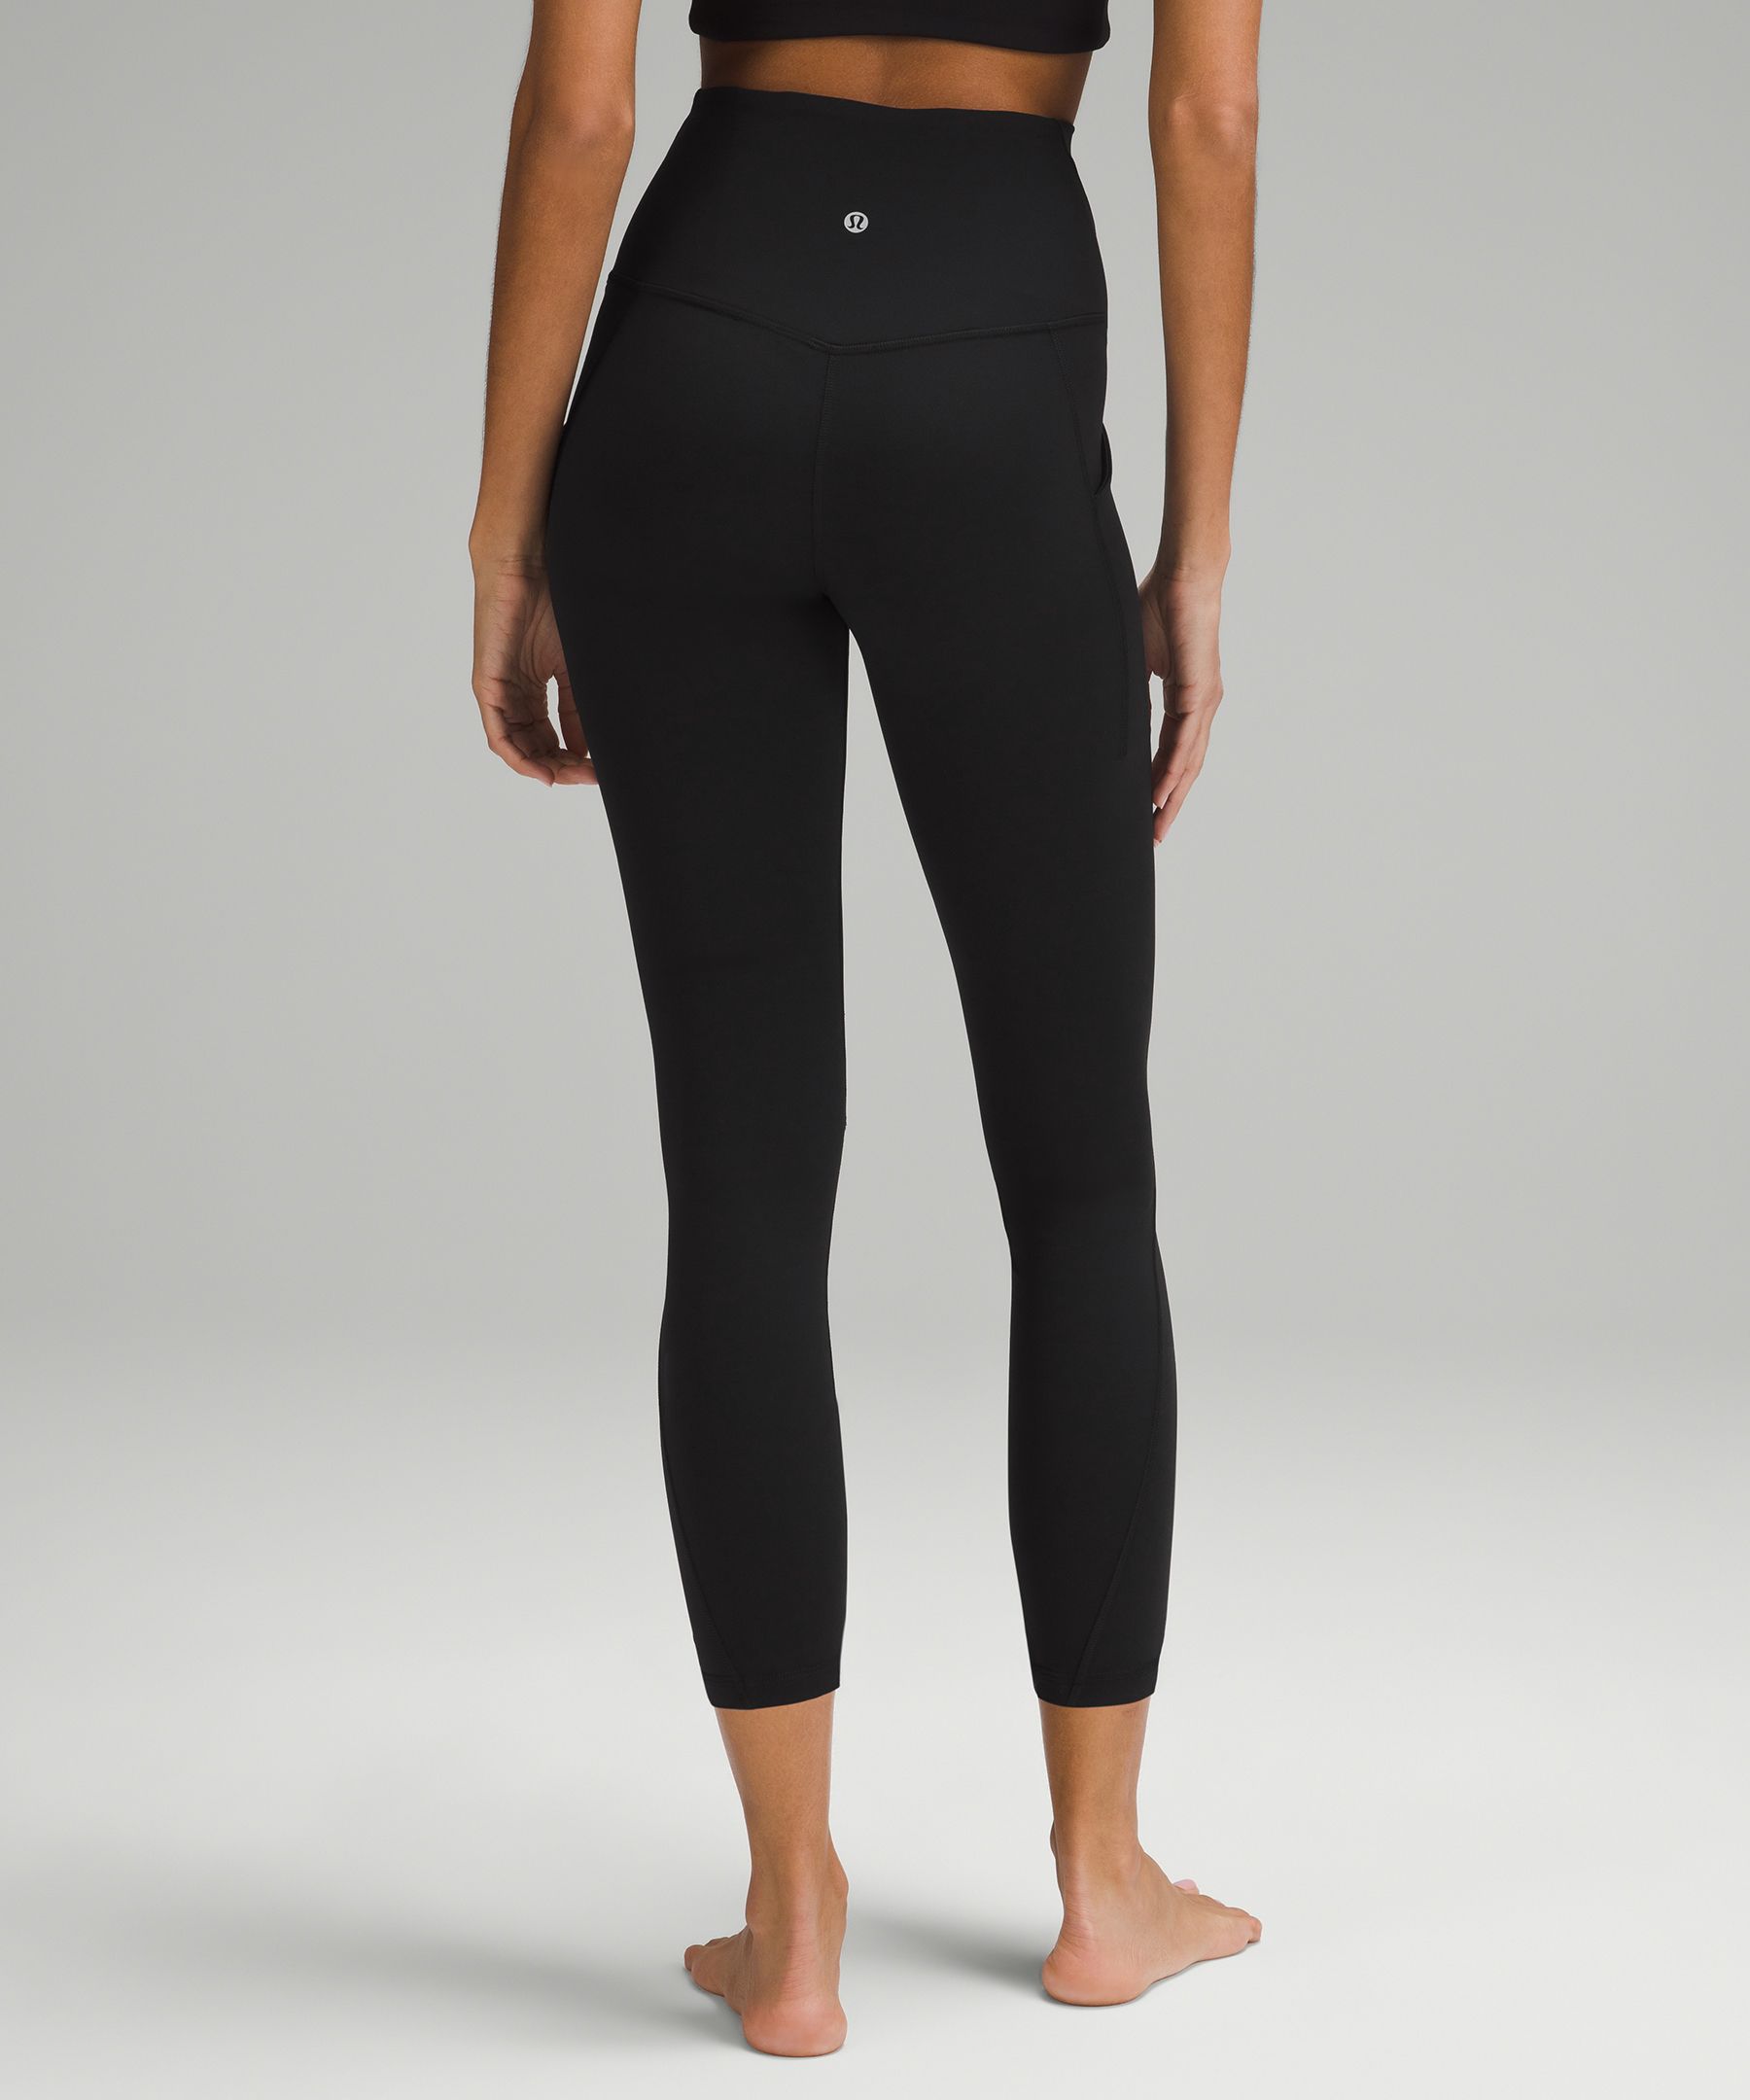 lululemon Align™ High-Rise Pant with Pockets 25, Women's Pants